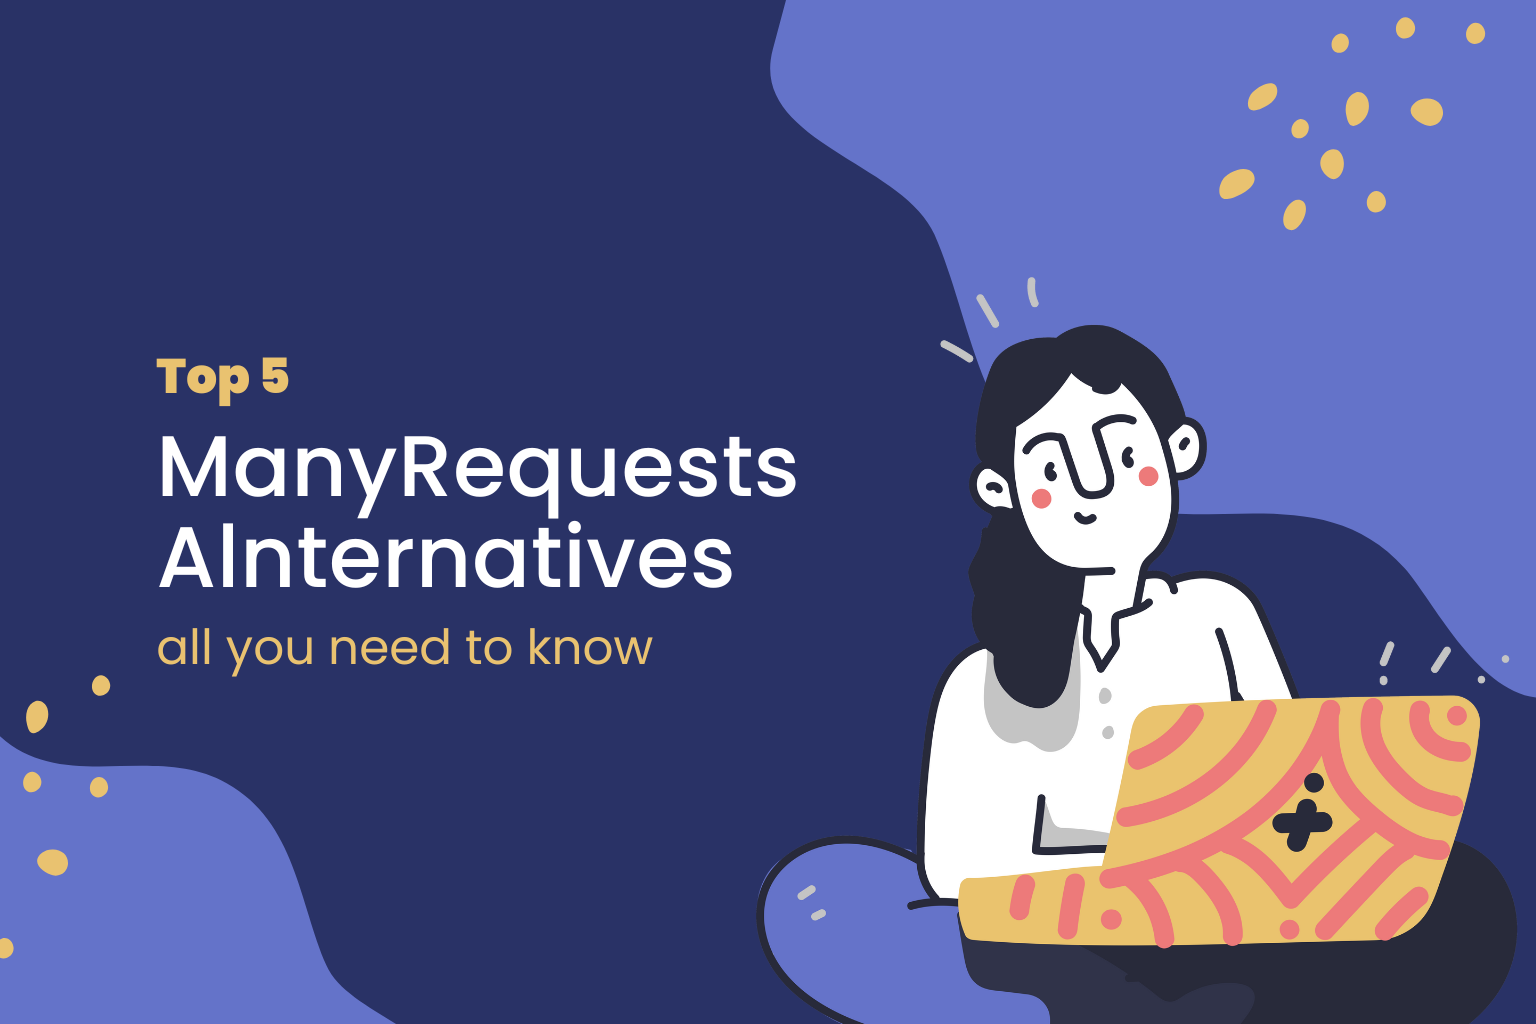 Top 5 ManyRequests Alternatives in 2022